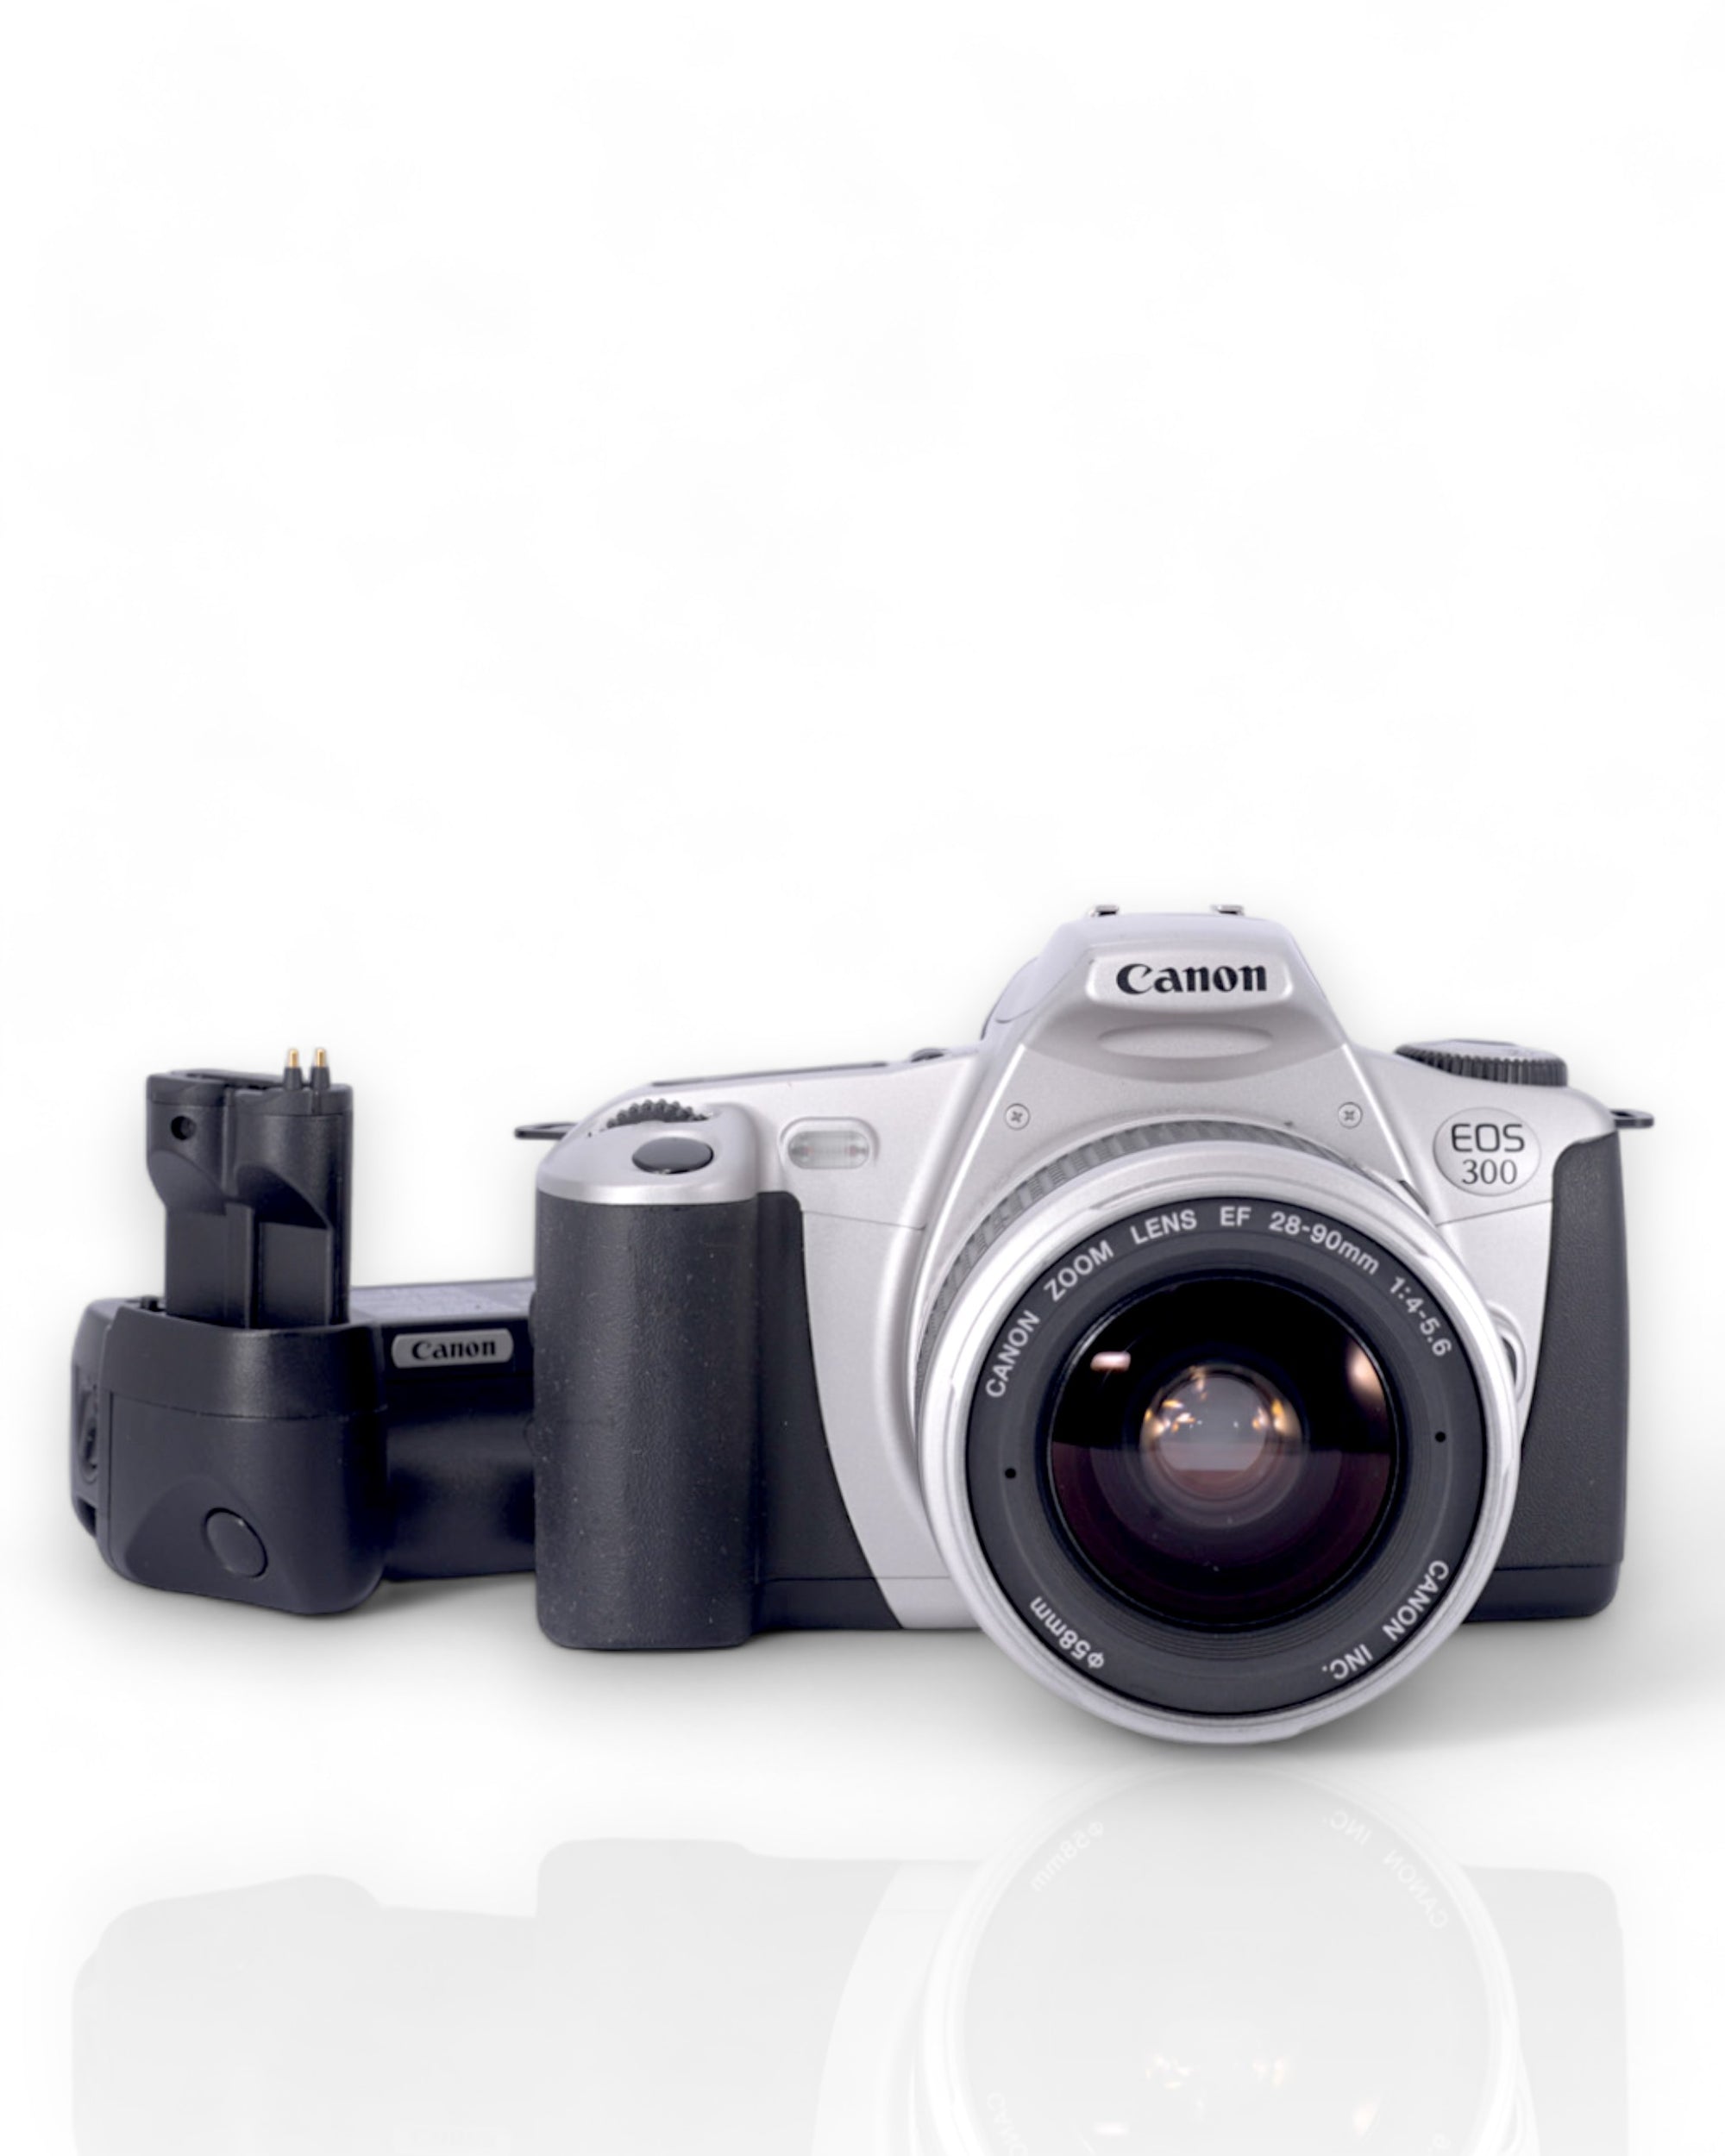 Canon EOS 300 35mm SLR Film Camera with 28-90mm Lens